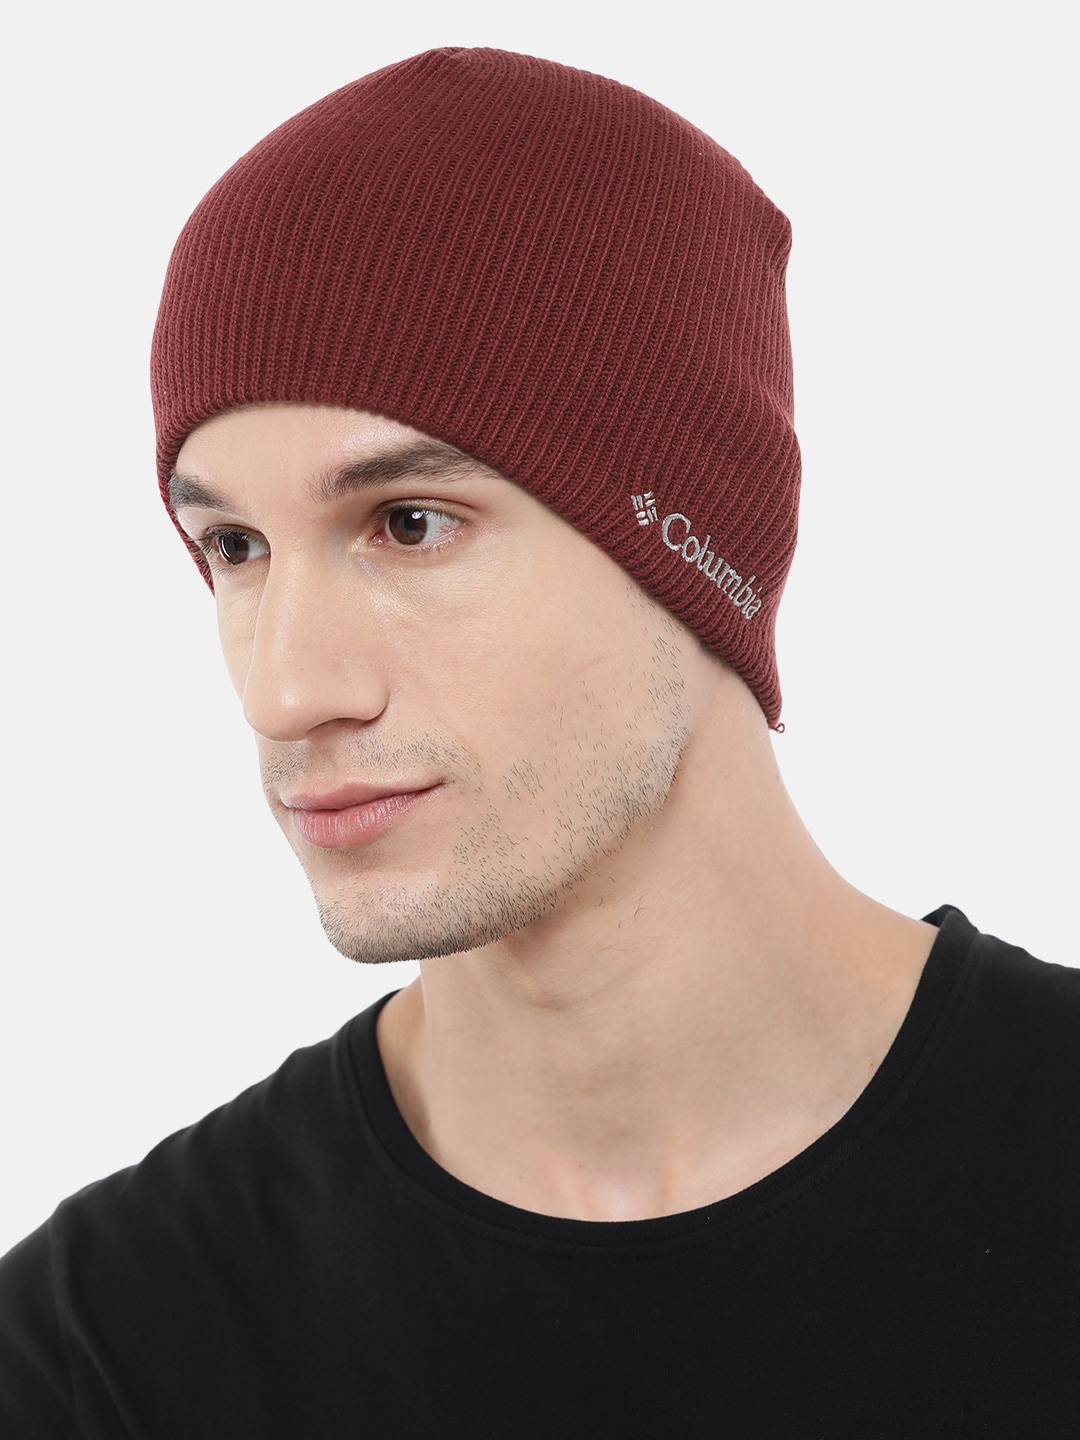 Columbia Unisex Rust Red Solid Beanie Price in India